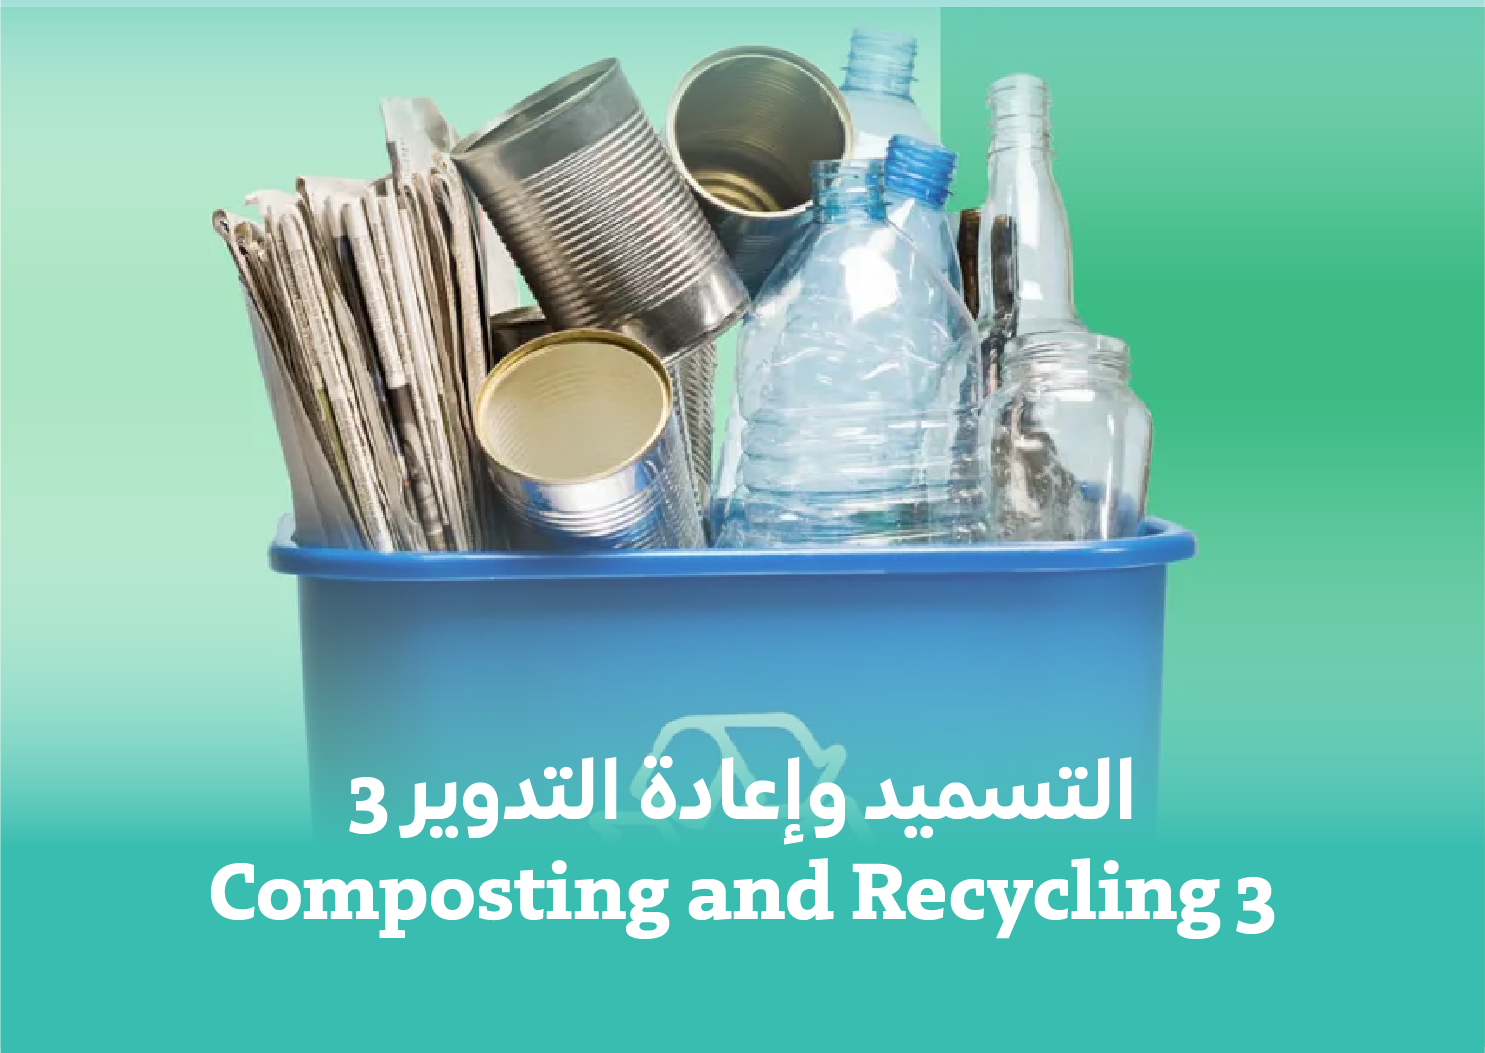 Composting and Recycling 3